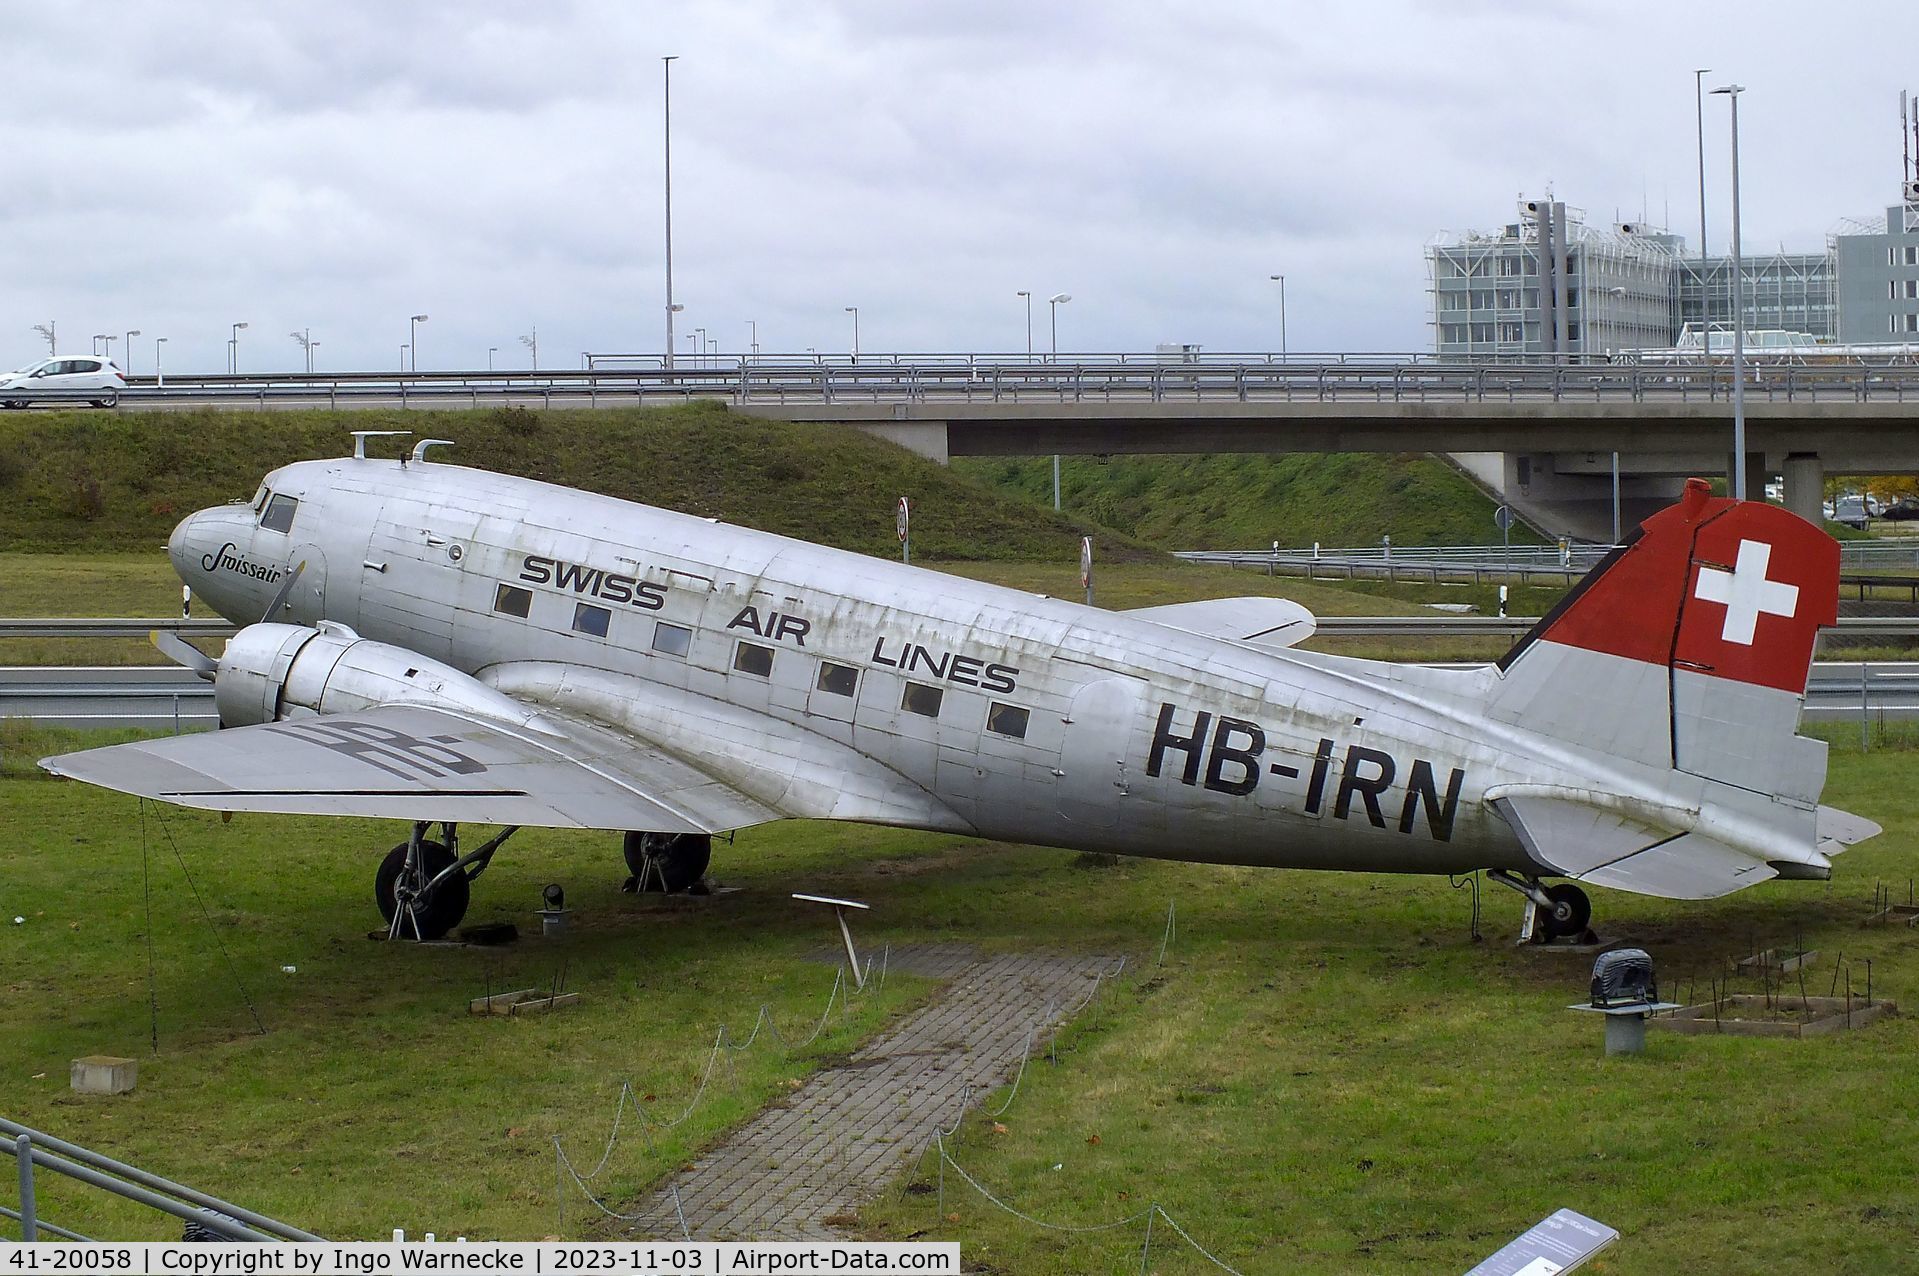 41-20058, 1941 Douglas C-53-DO C/N 4828, Douglas C-53-DO, displayed to represent 'HB-IRN' of Swissair at the visitors park of Munich international airport (Besucherpark). The real HB-IRN is preserved at the Verkehrshaus der Schweiz in Lucerne